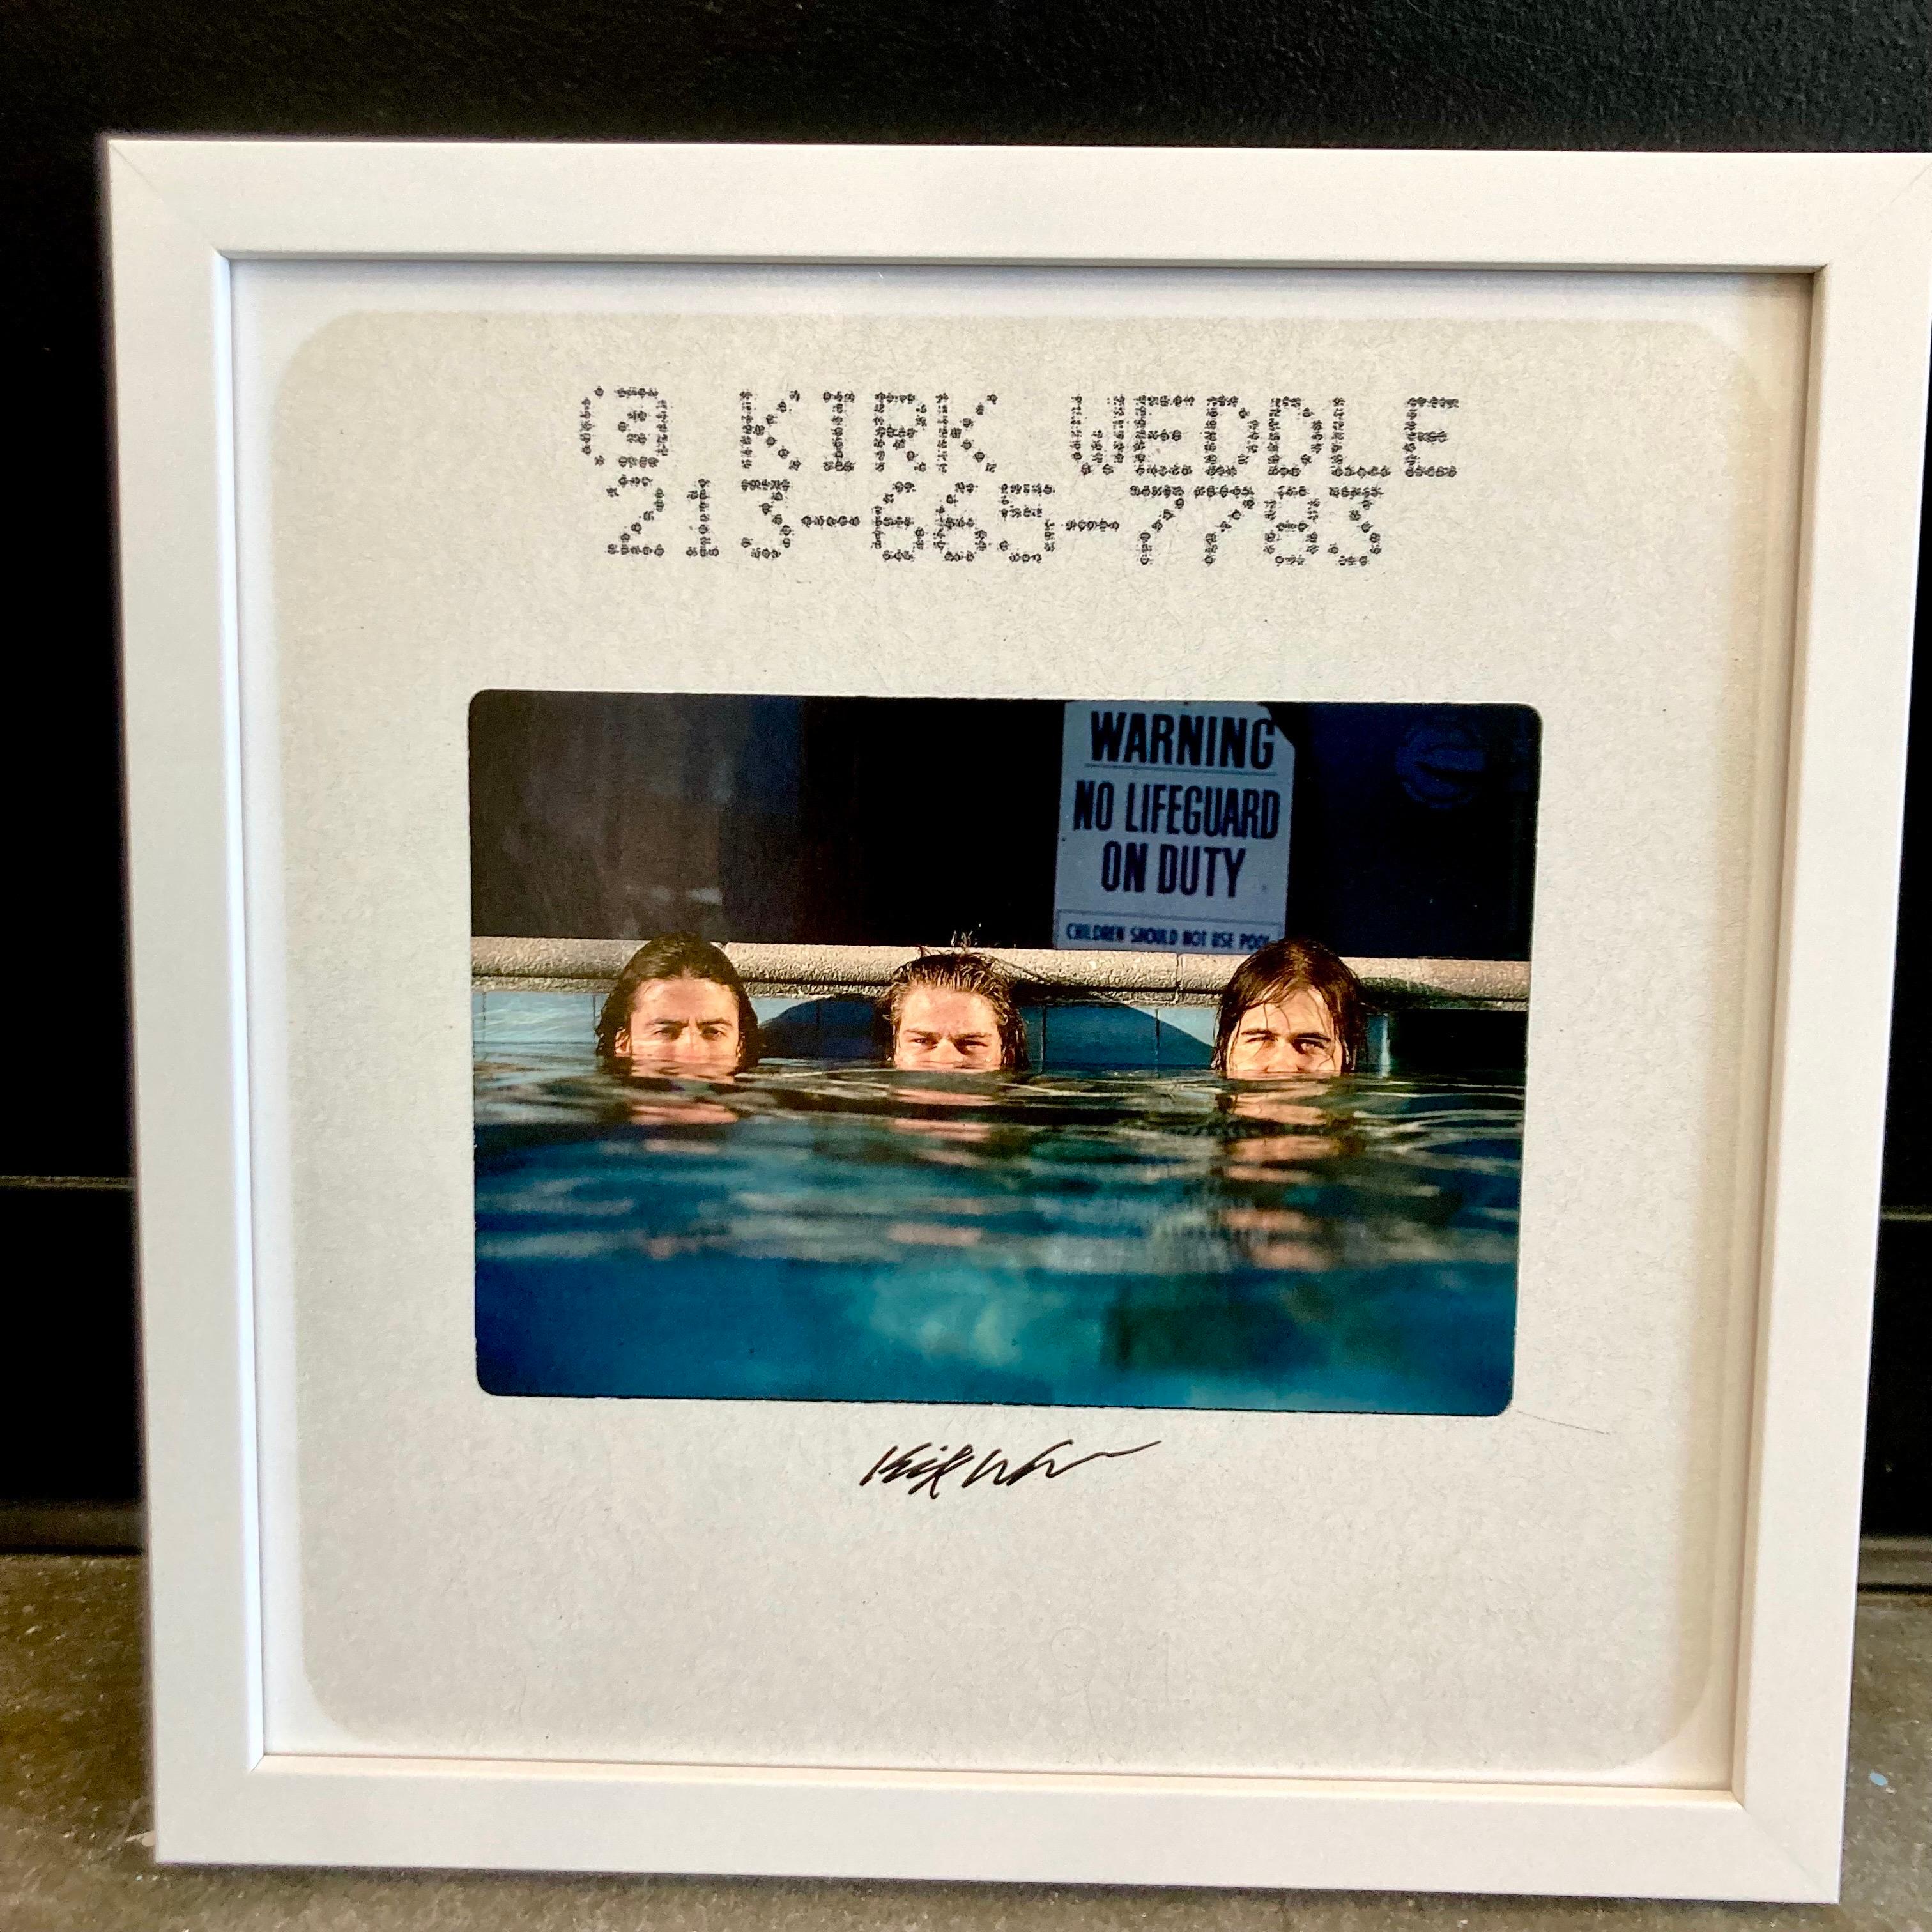 Signed color slide print of Nirvana taken by Kirk Weddle during his session with the band in the pool to promote the 1991 groundbreaking album, Nevermind.

This is a photograph, taken by Kirk Weddle of the the original color slide, also taken by